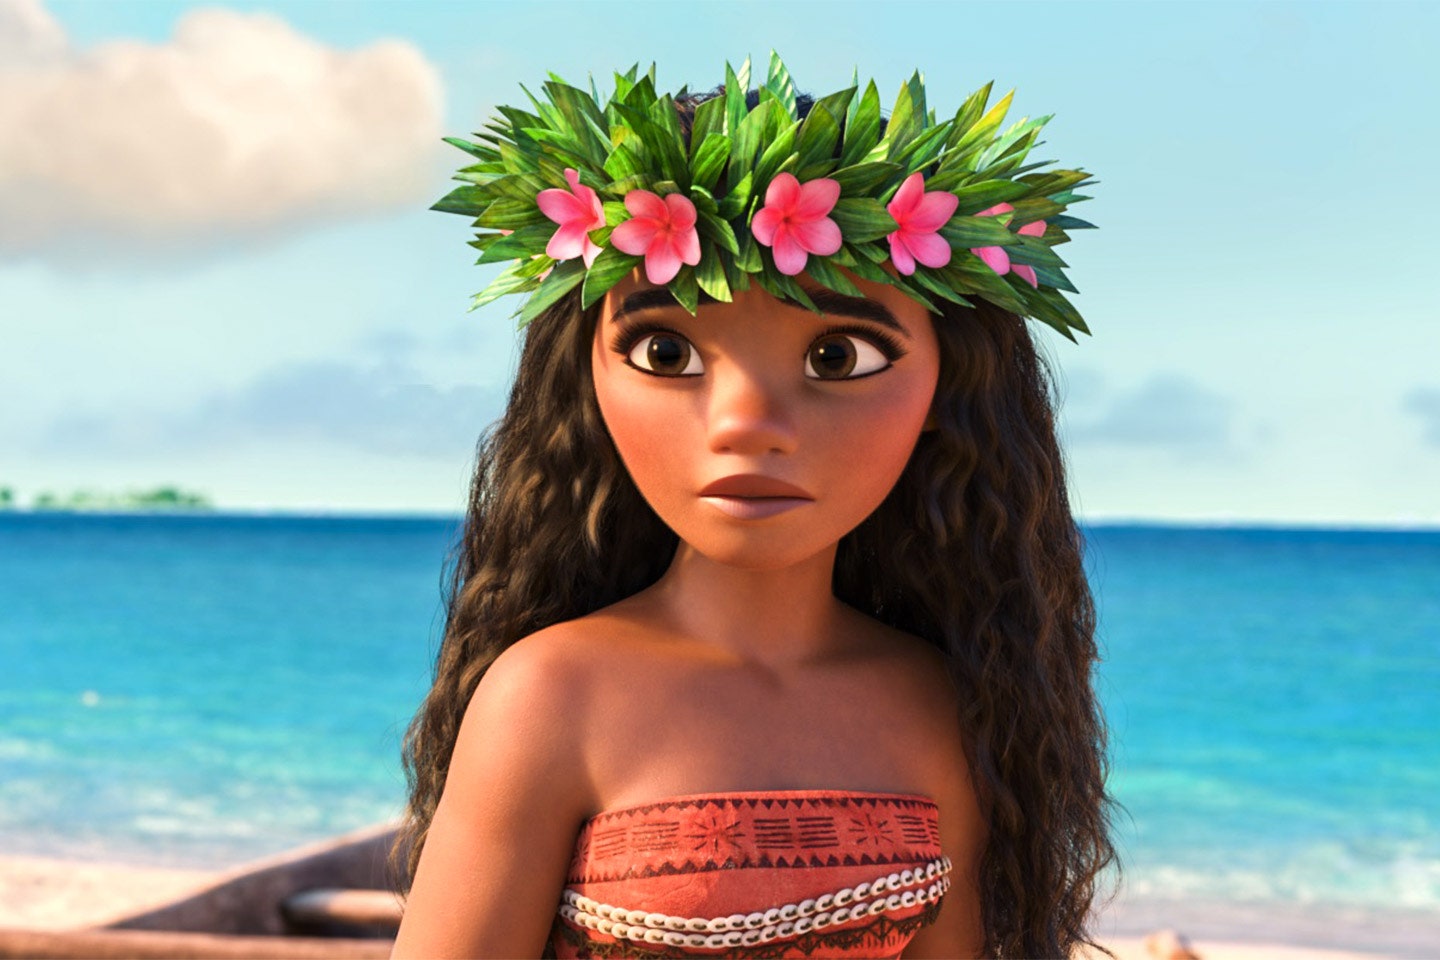 Moana stands in front of the ocean with wearing a wreath of flowers in her hair.